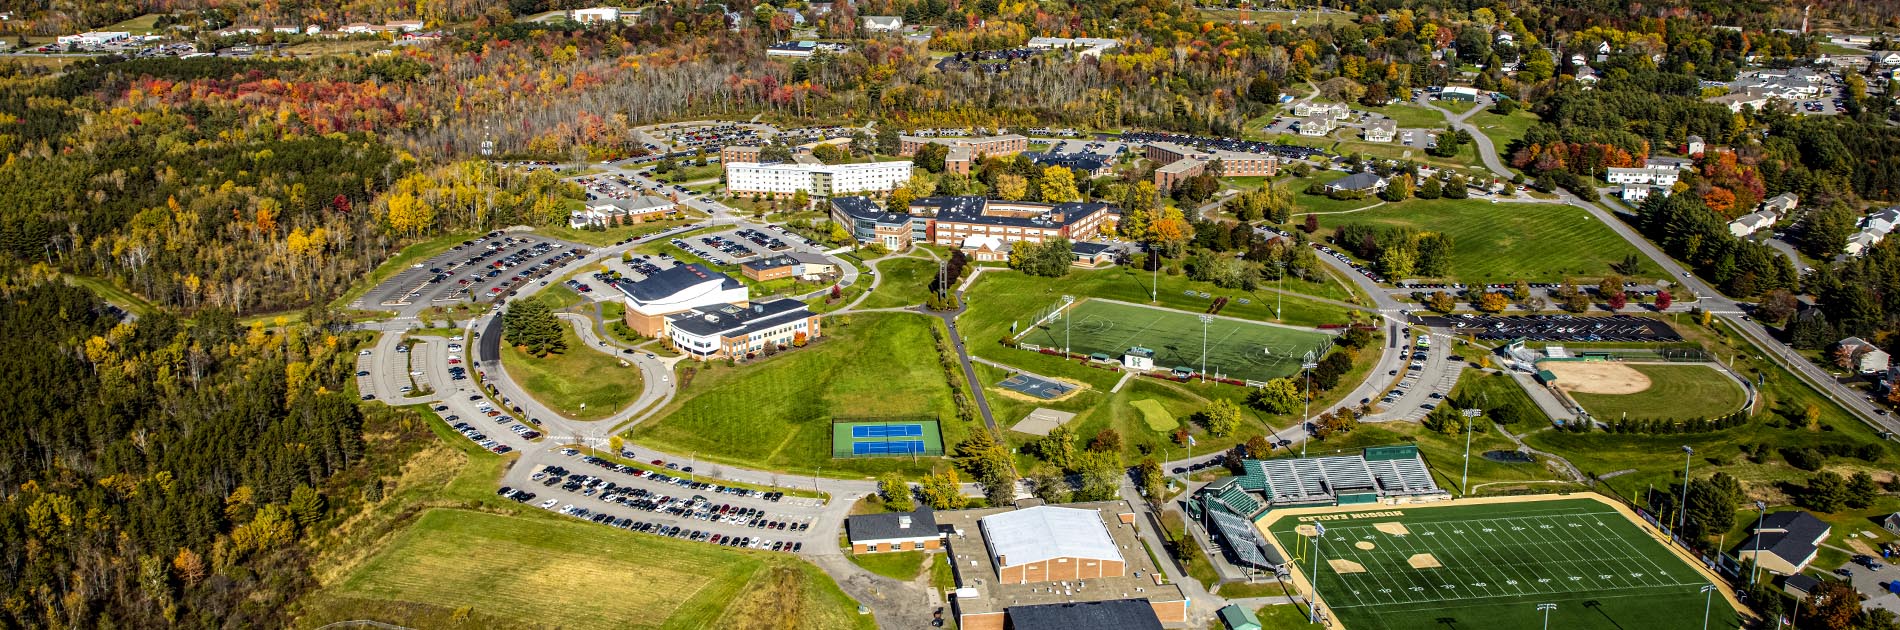 Panoramic image of the Husson campus